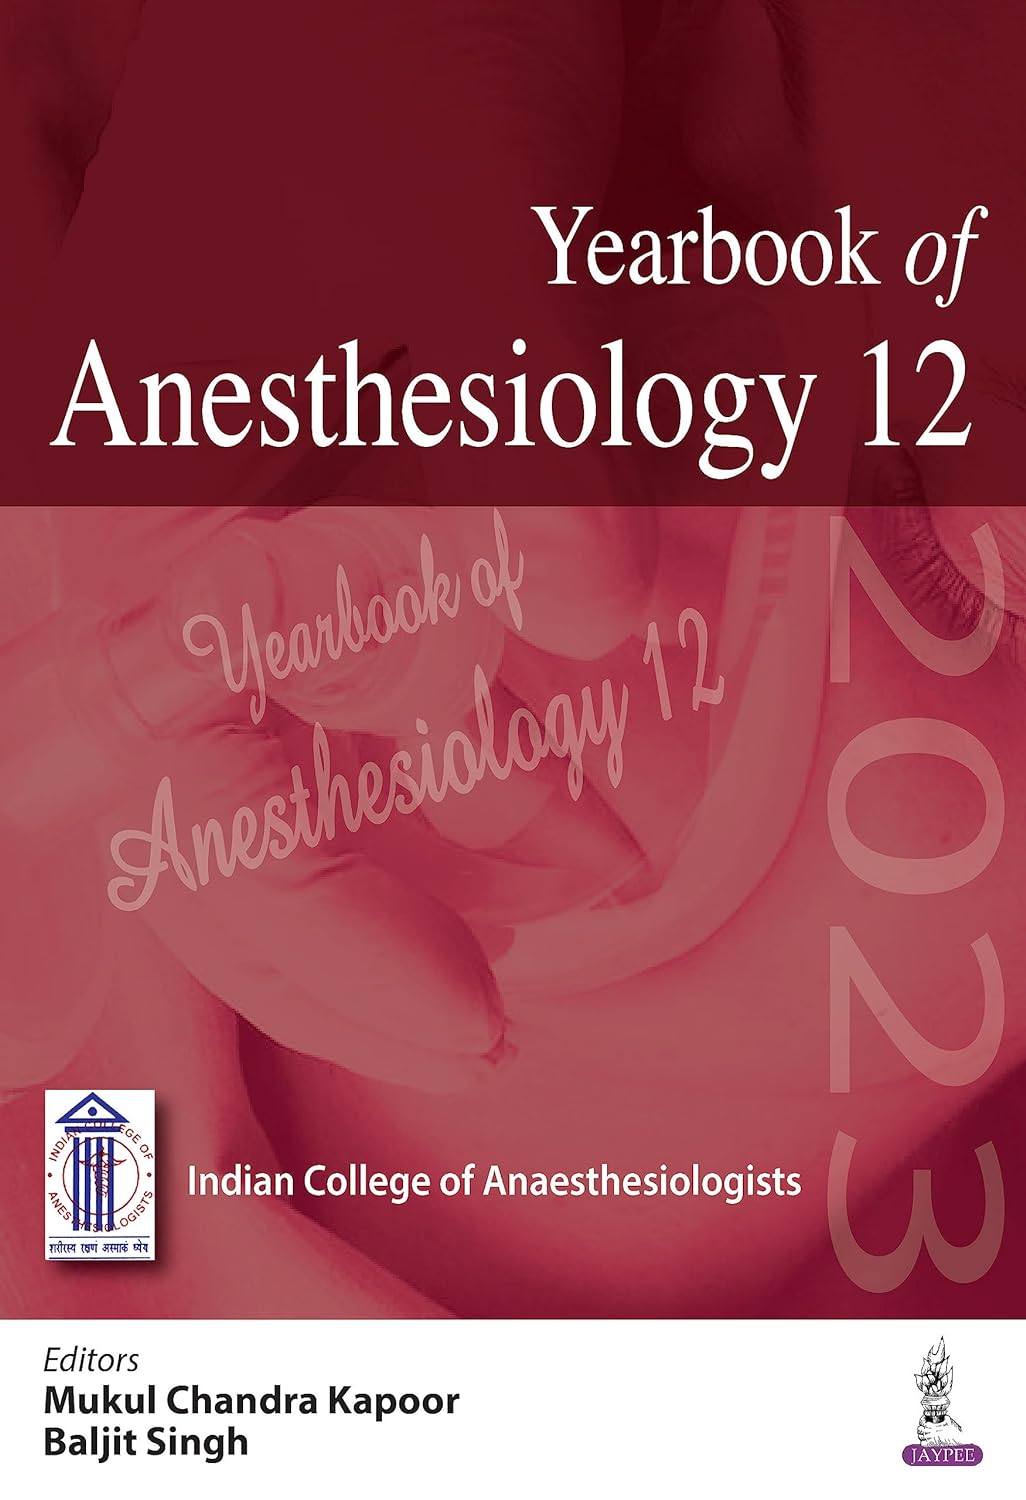 Yearbook of Anesthesiology 12  by Mukul Chandra Kapoor 